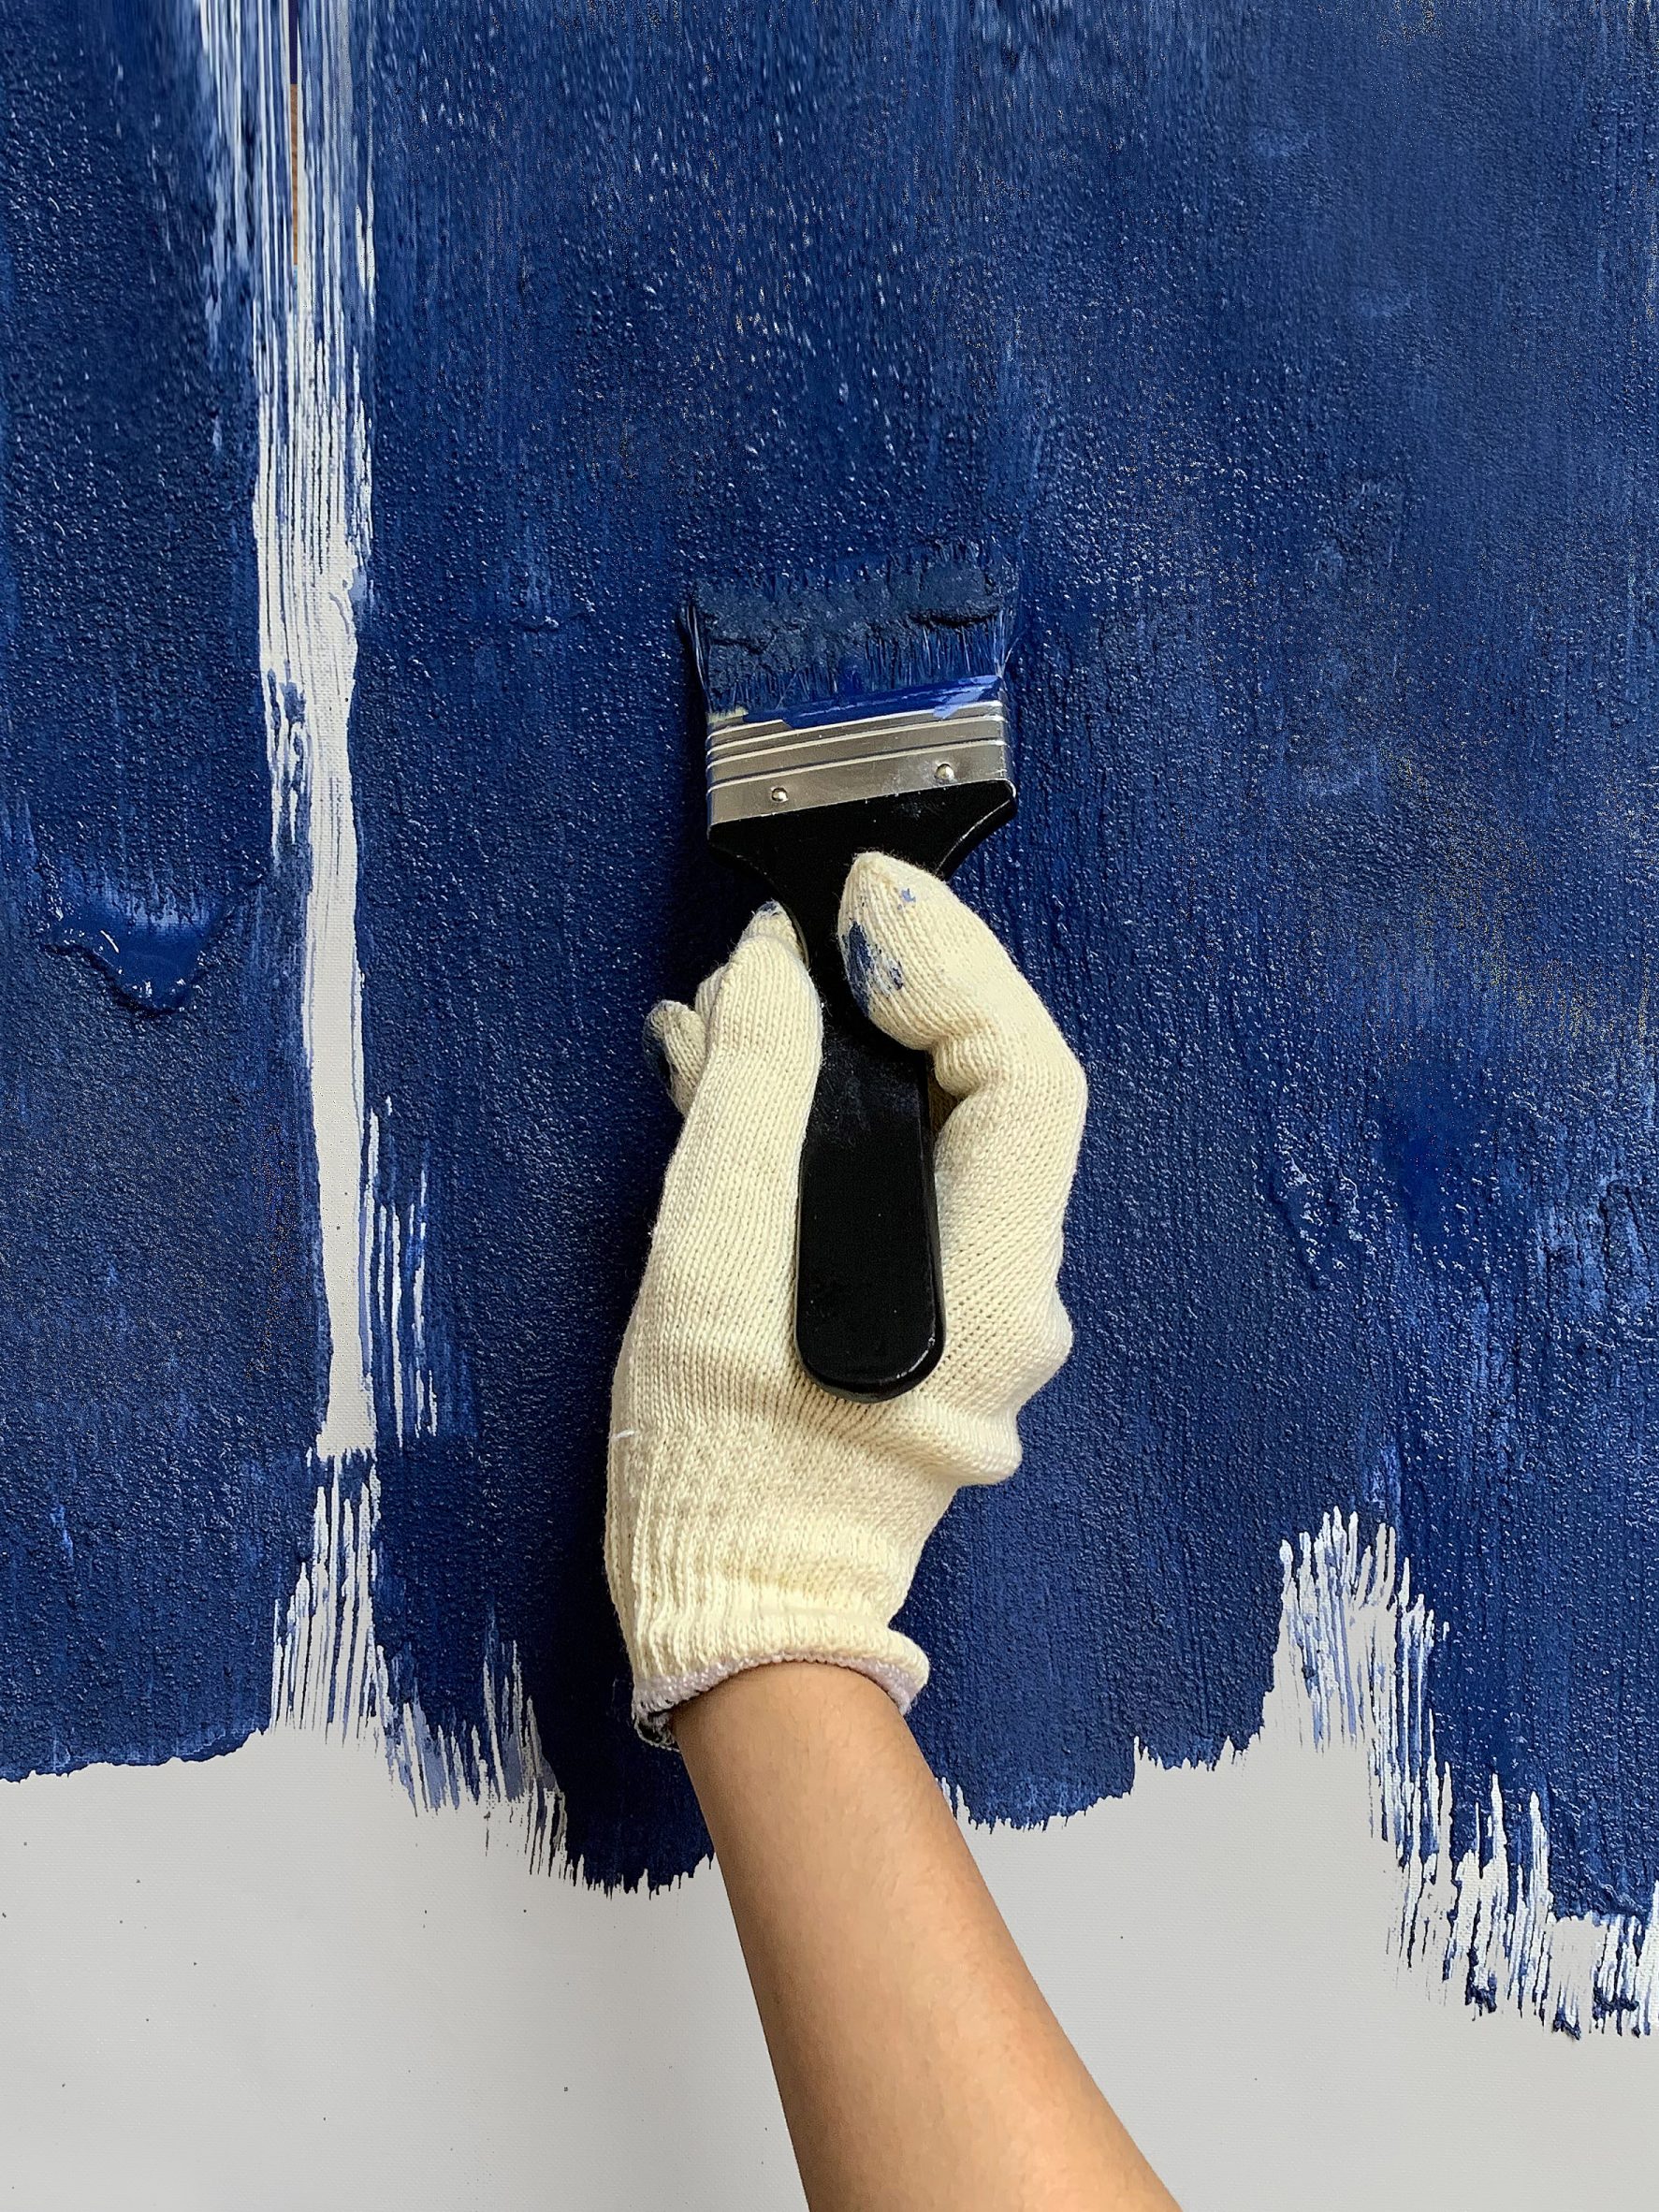 Hand applying blue Celour paint with a brush